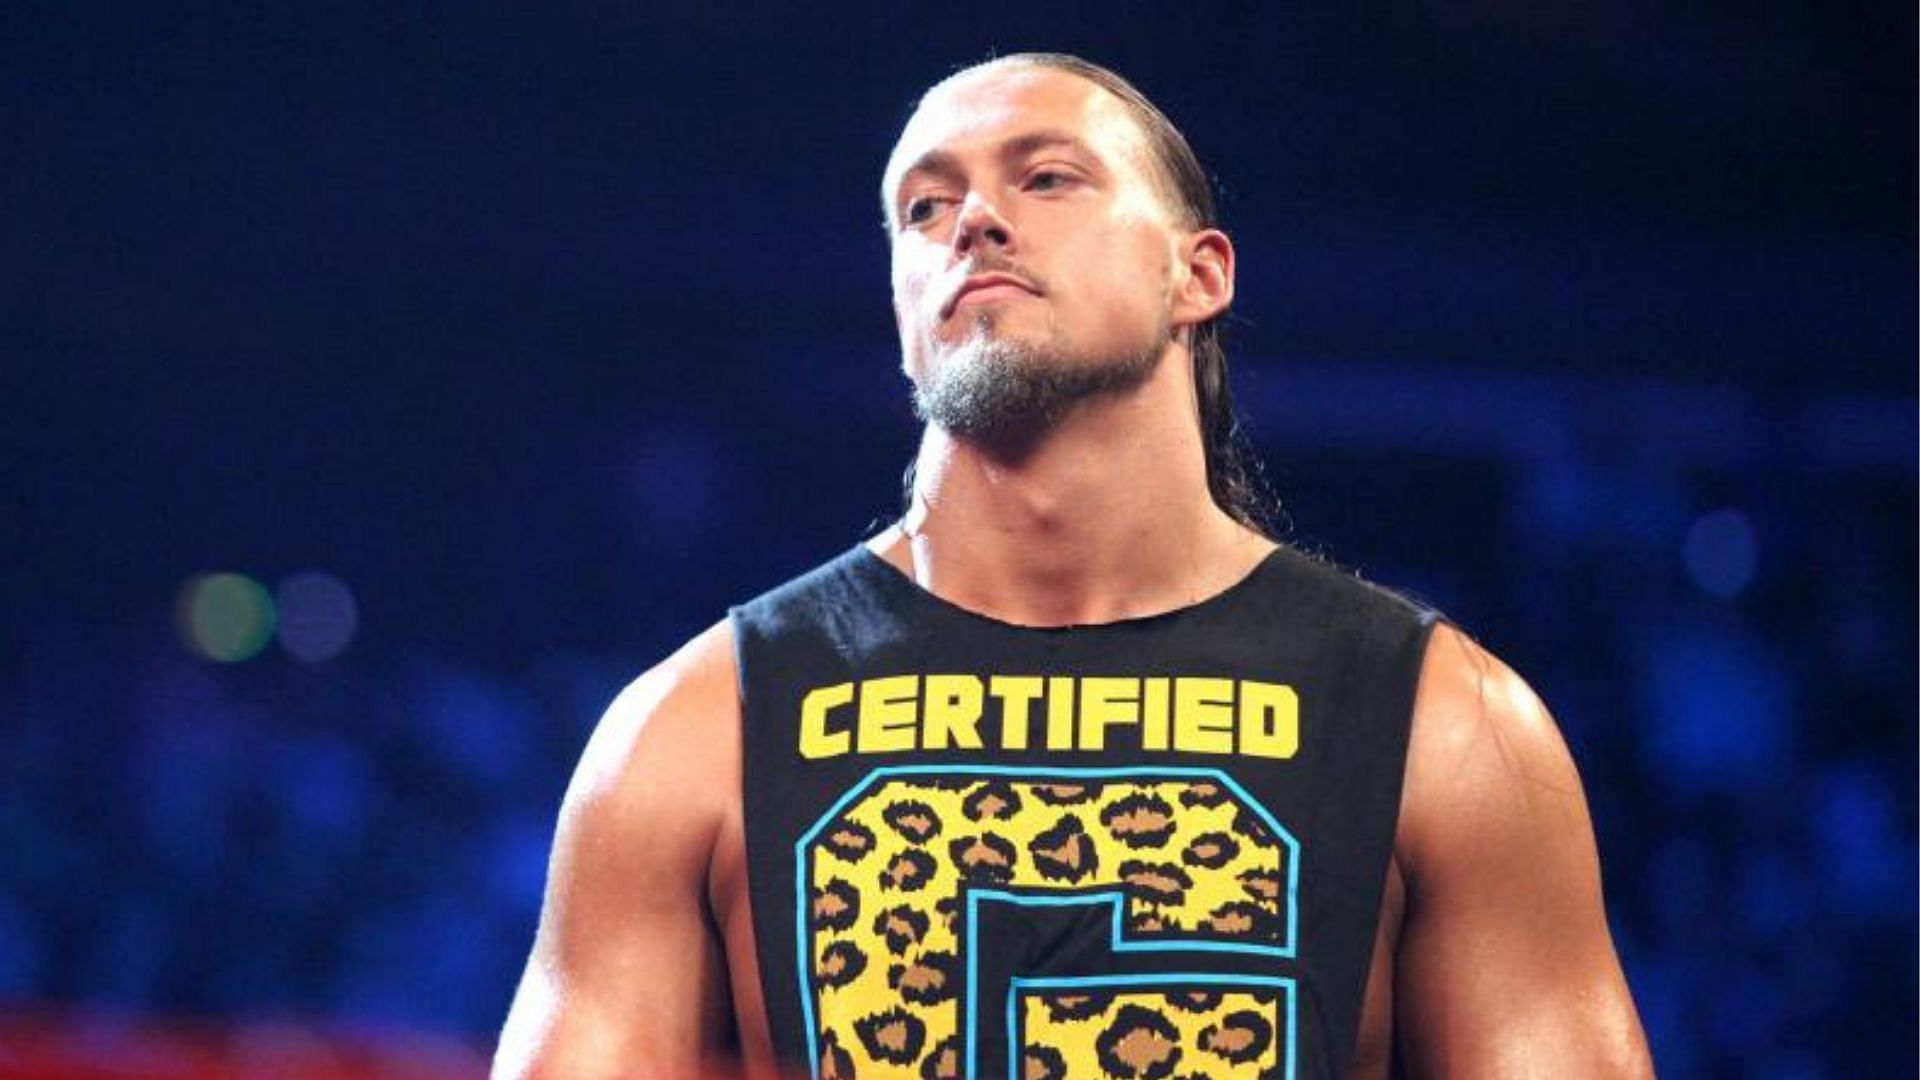 Big Cass worked for WWE between 2011 and 2018